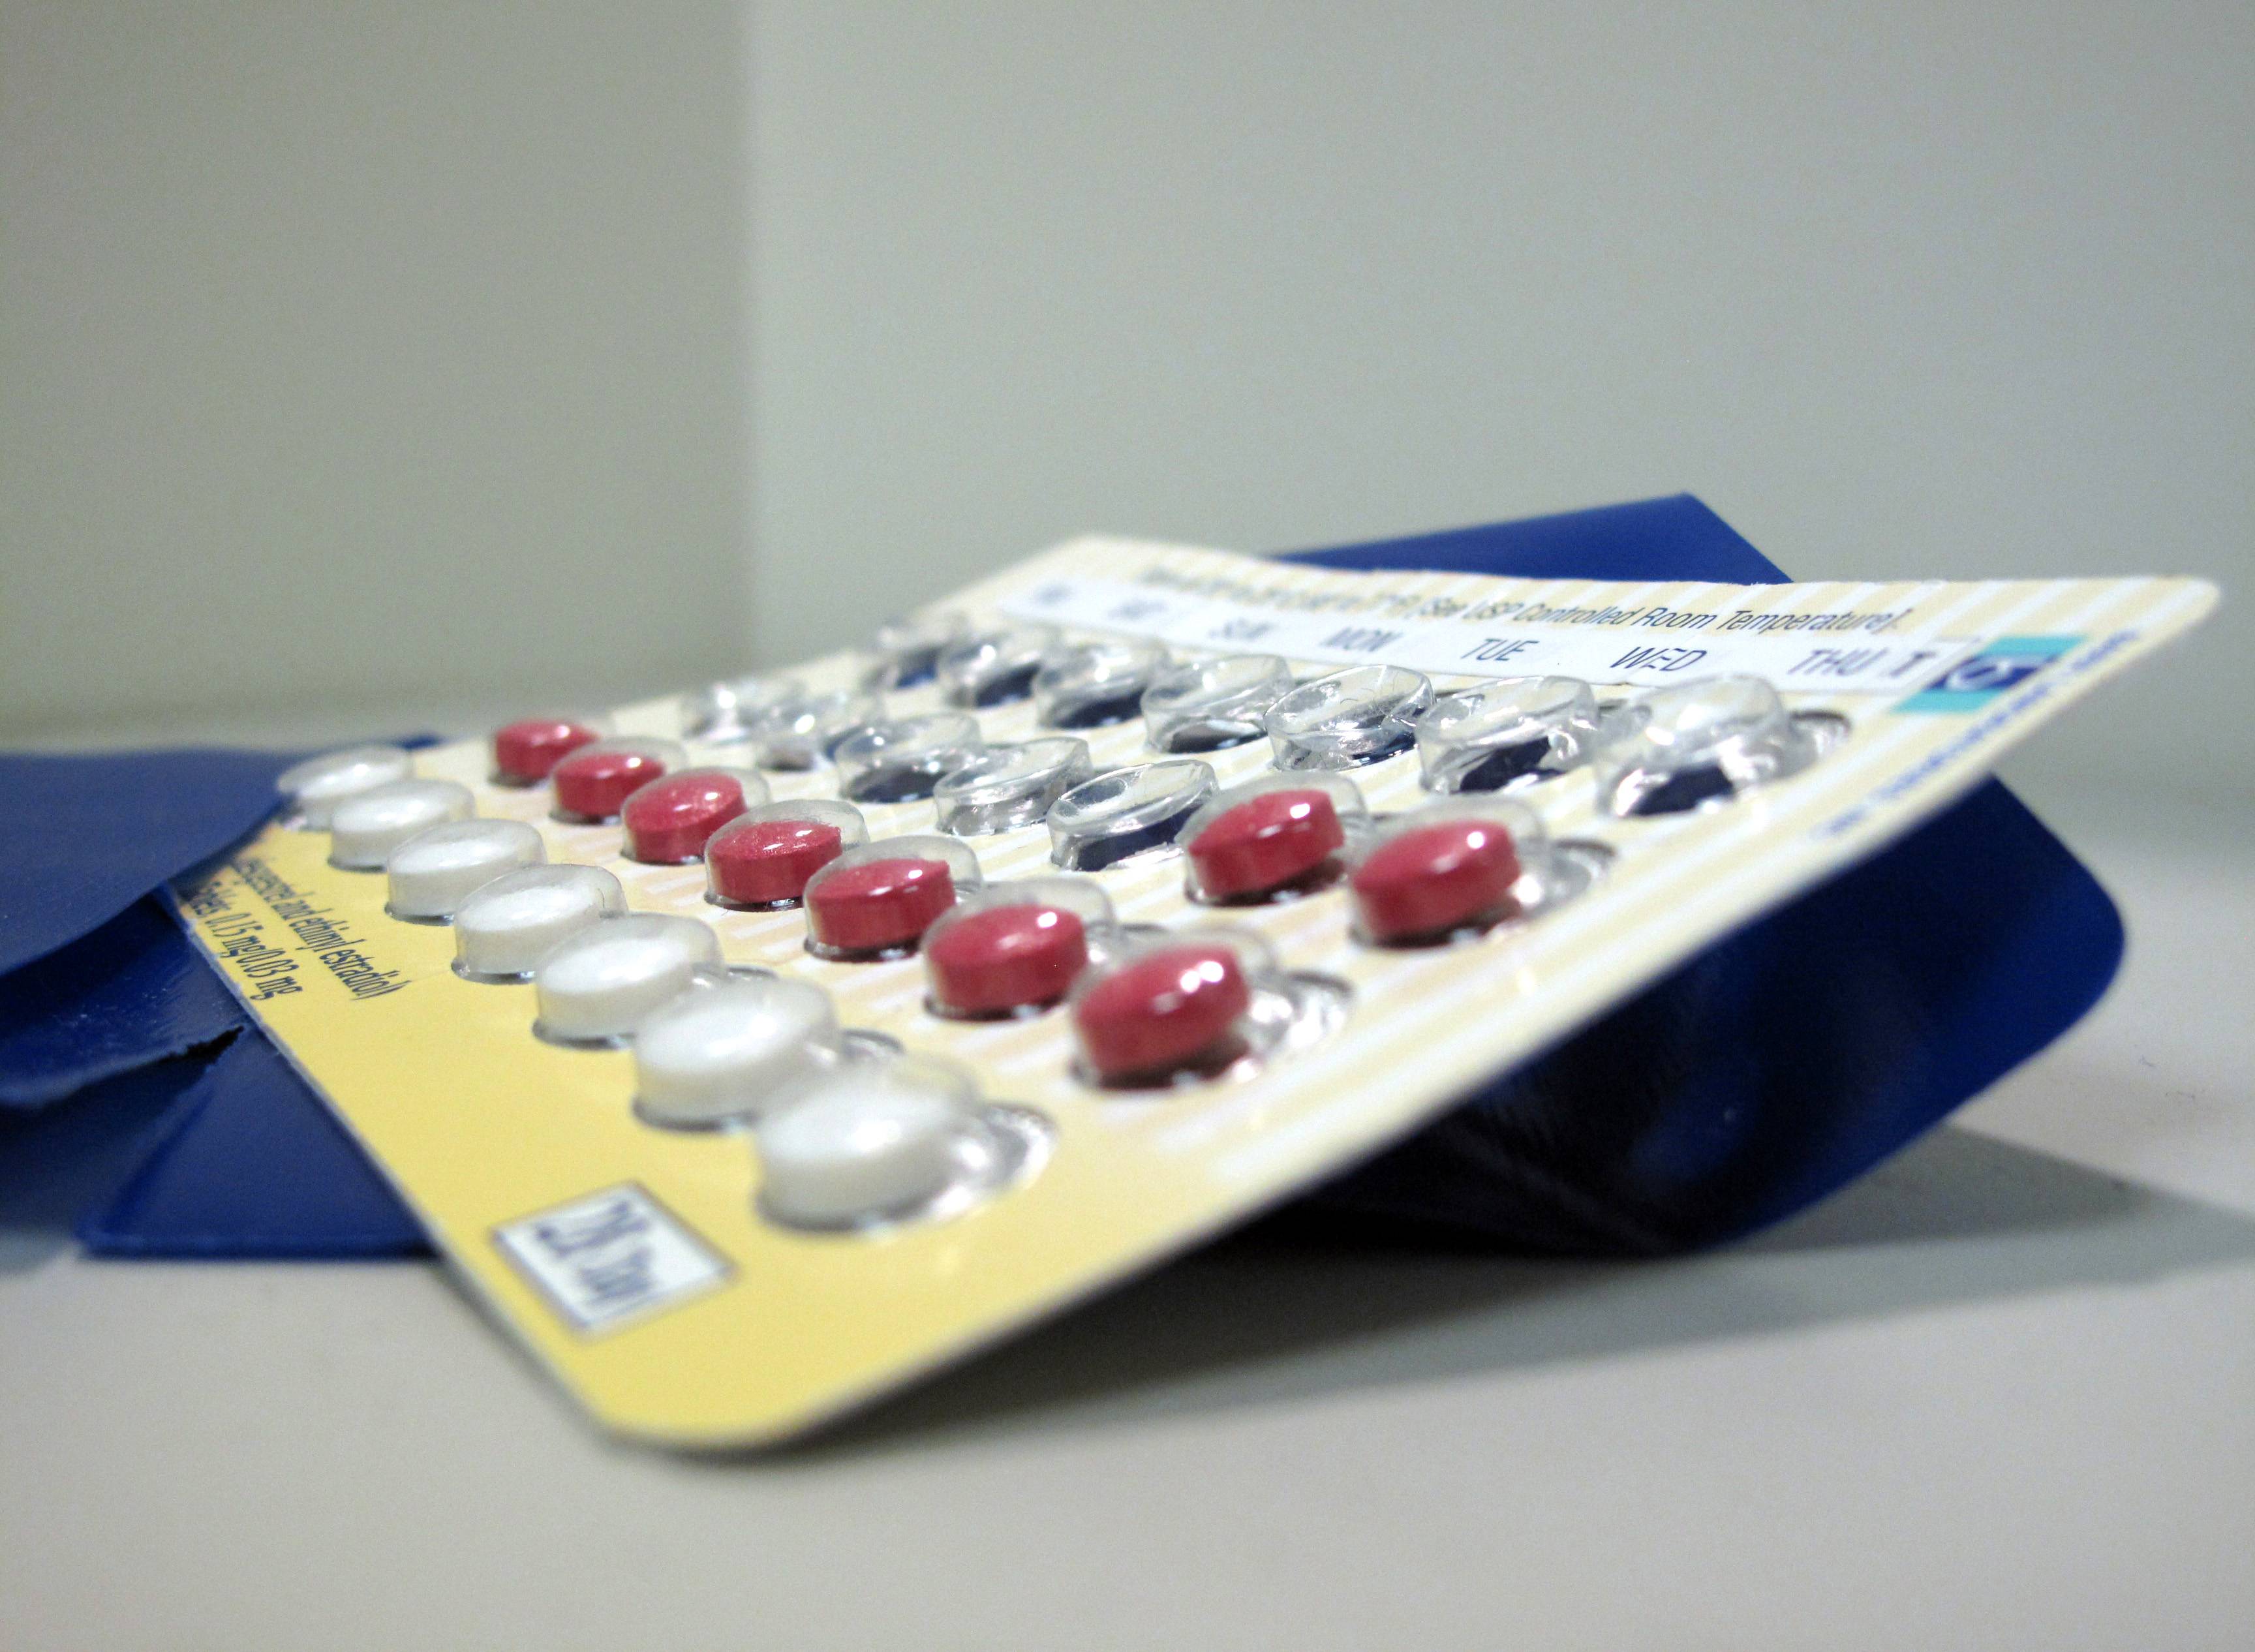 Birth Control Gains Acceptance Among Catholics - In recent months, outcry from religious leaders presented a road block for the portion of President Obama’s health care plan that required all institutions, including Catholic ones, to offer birth control as part of employee healthcare plans. However, 82 percent of Catholic voters in a Gallup poll released May 23 said birth control is morally acceptable, which nearly matches the 89 percent of all Americans and 90 percent of non-Catholics who said the same.  (Photo: Kelsey Snell/MCT /Landov)